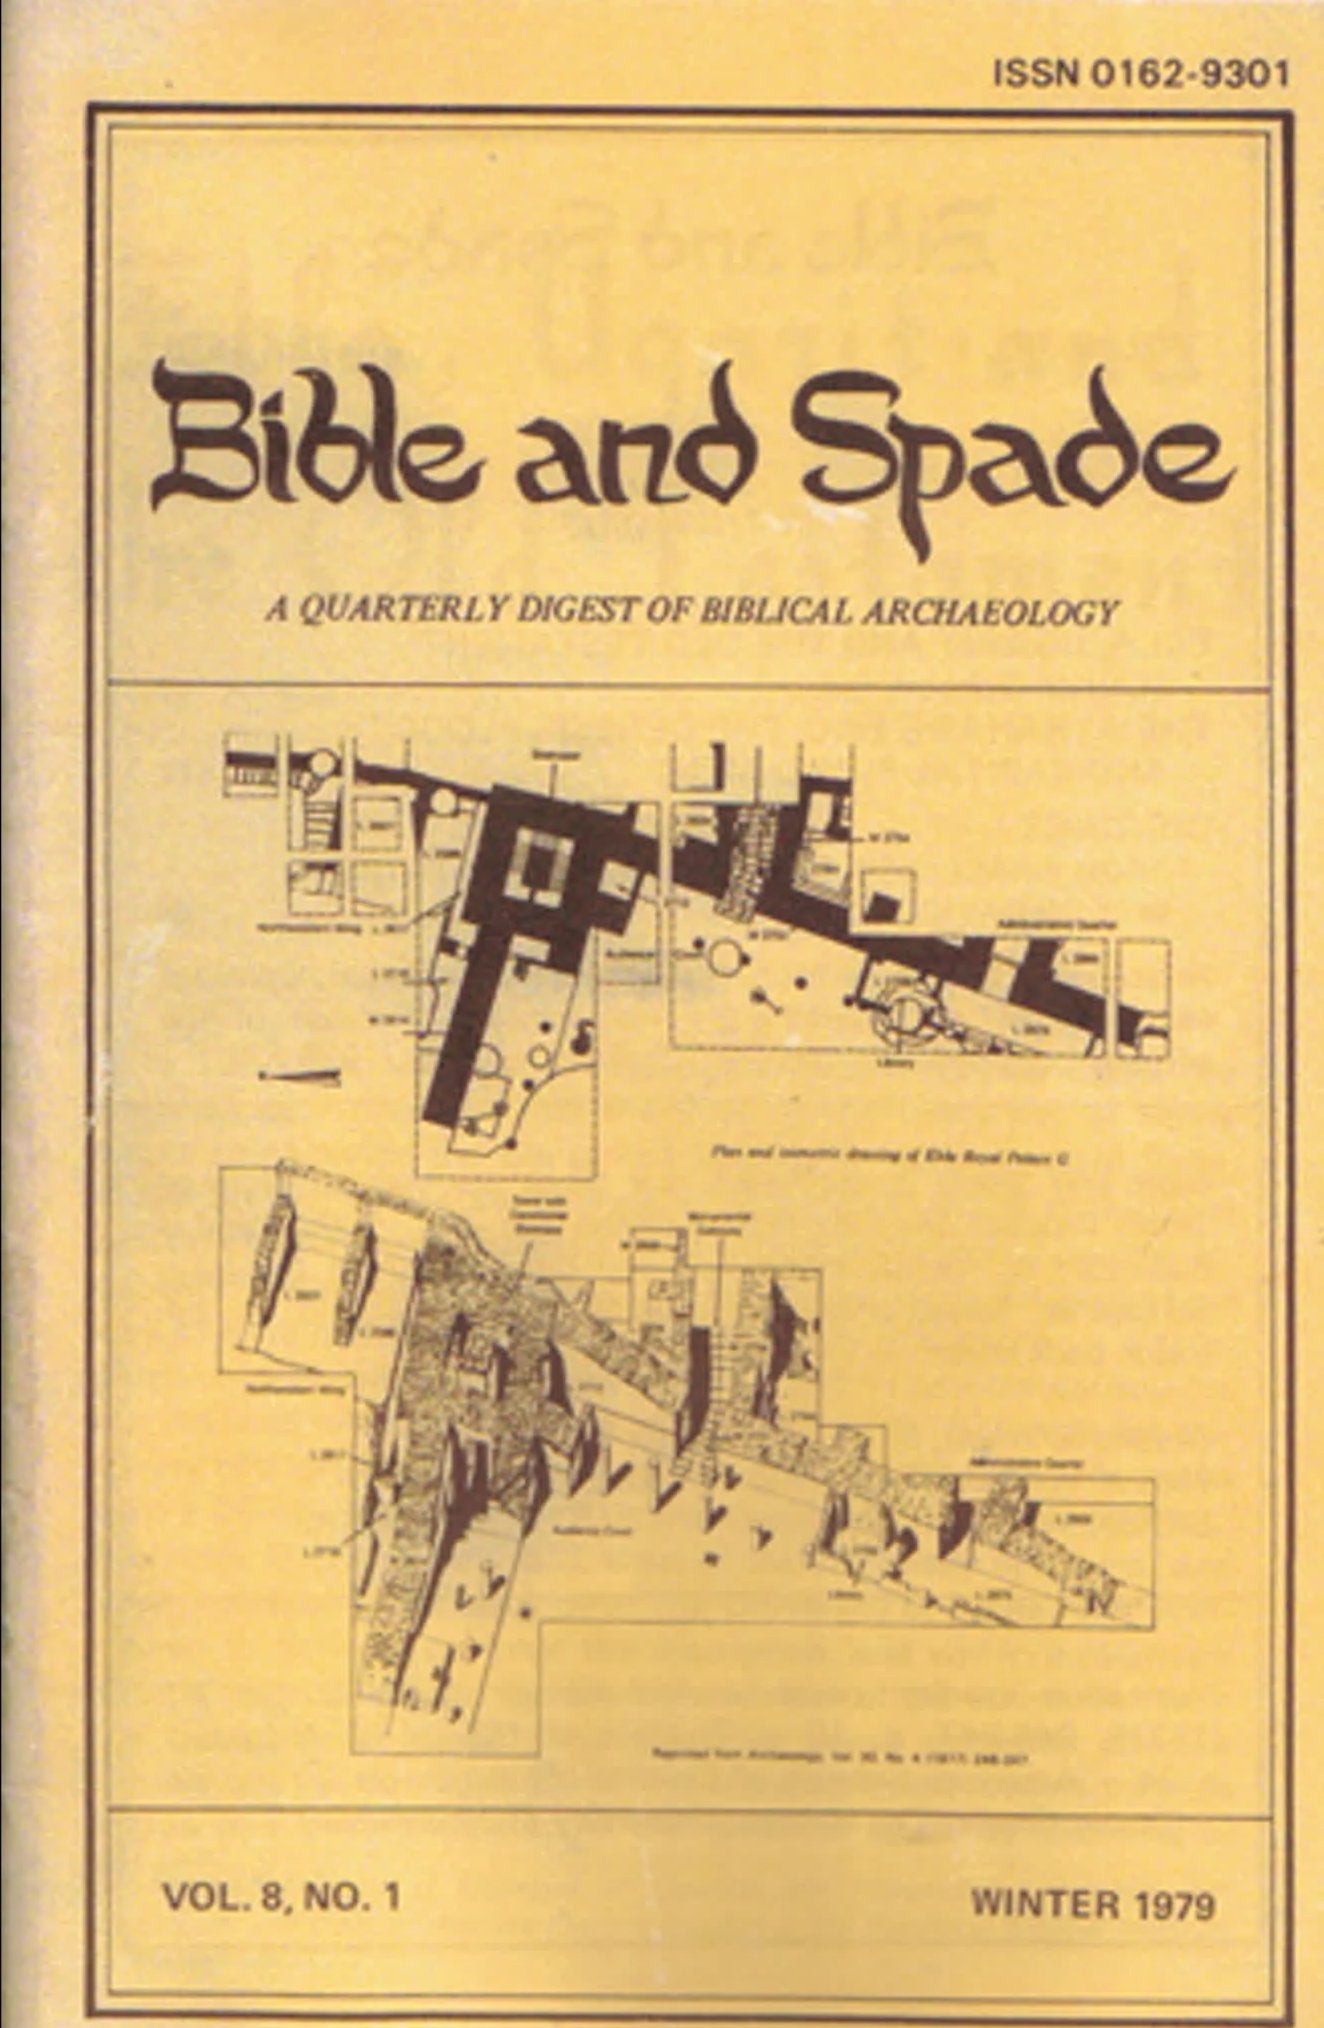 Issues of BIBLE and SPADE produced in 1979